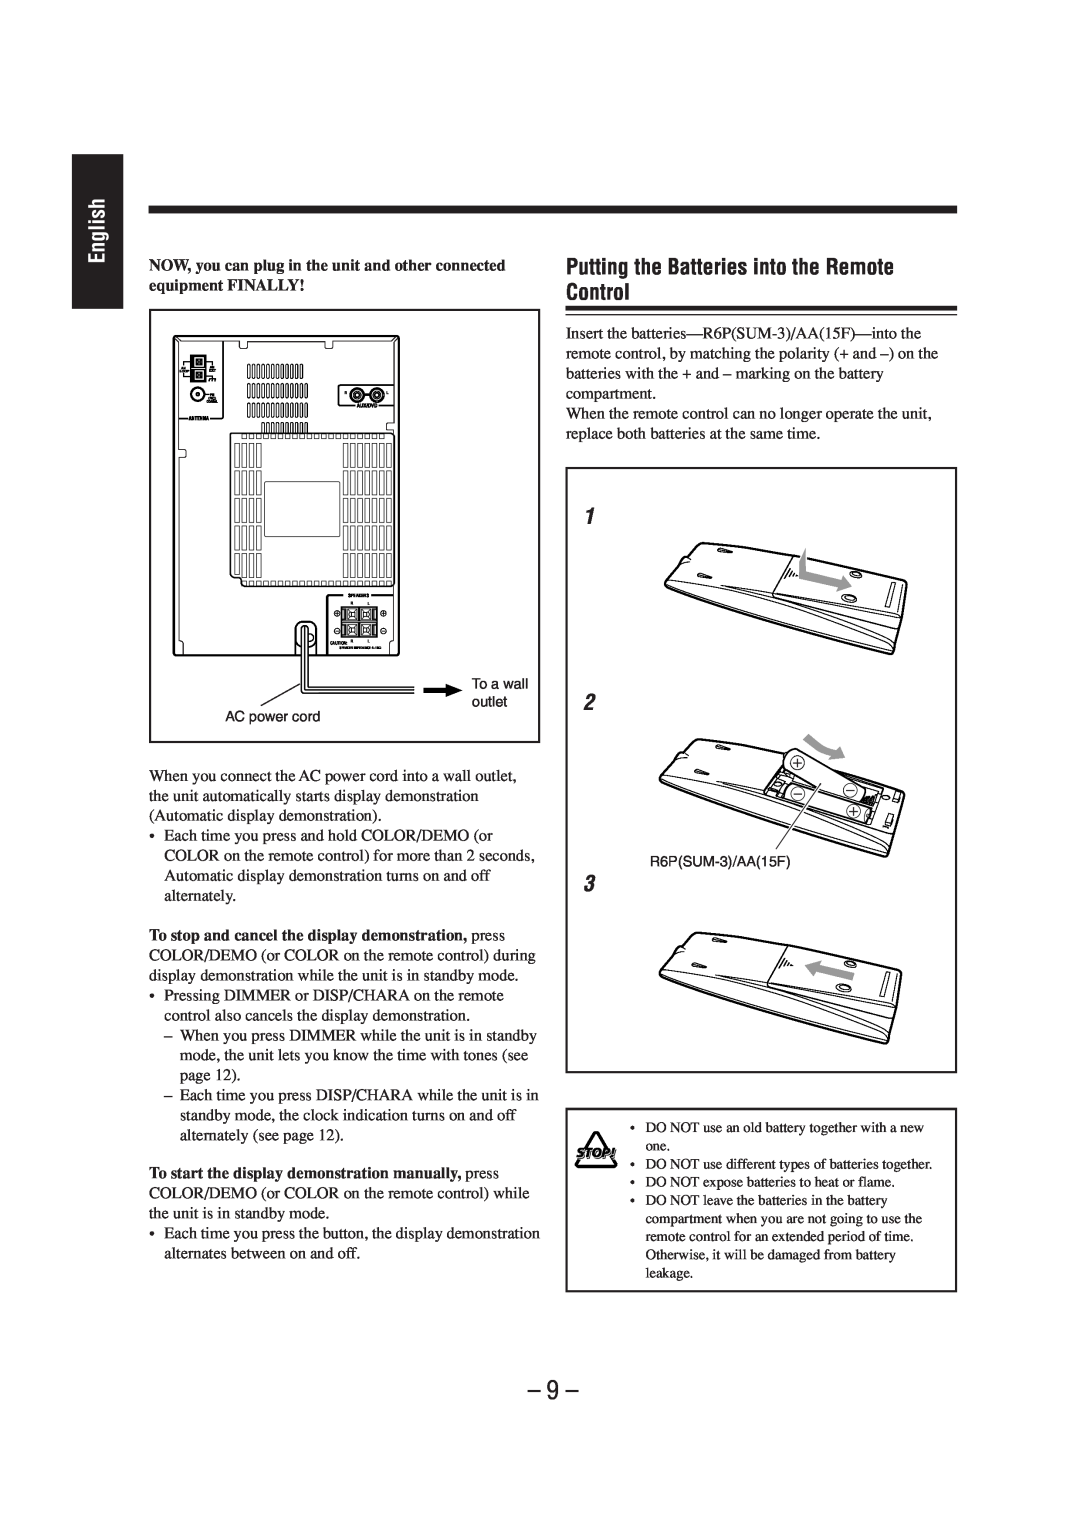 JVC LVT0900-004A, CA-UXZ7MD manual Putting the Batteries into the Remote Control, English 